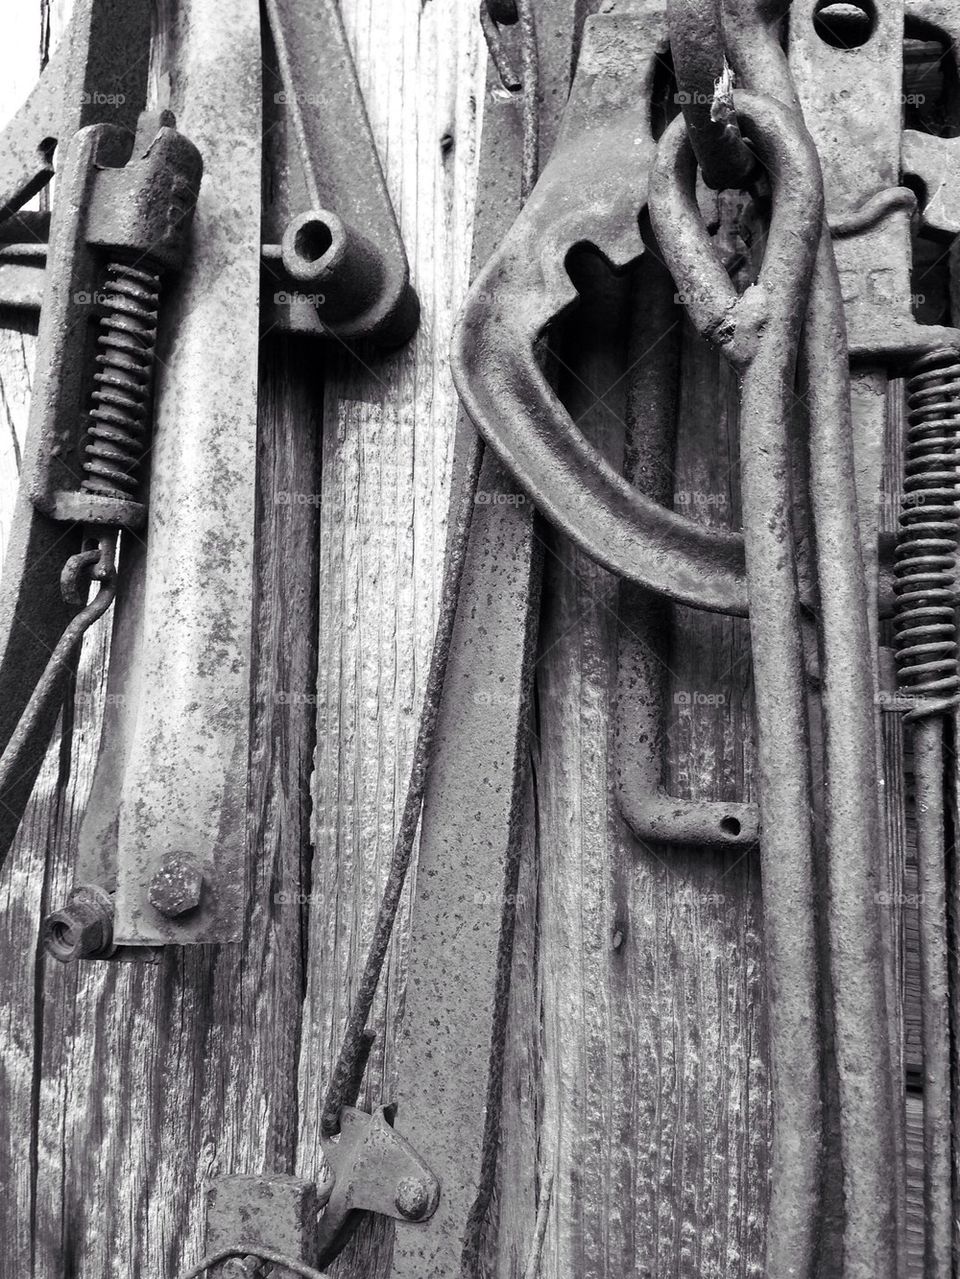 wall of old tools